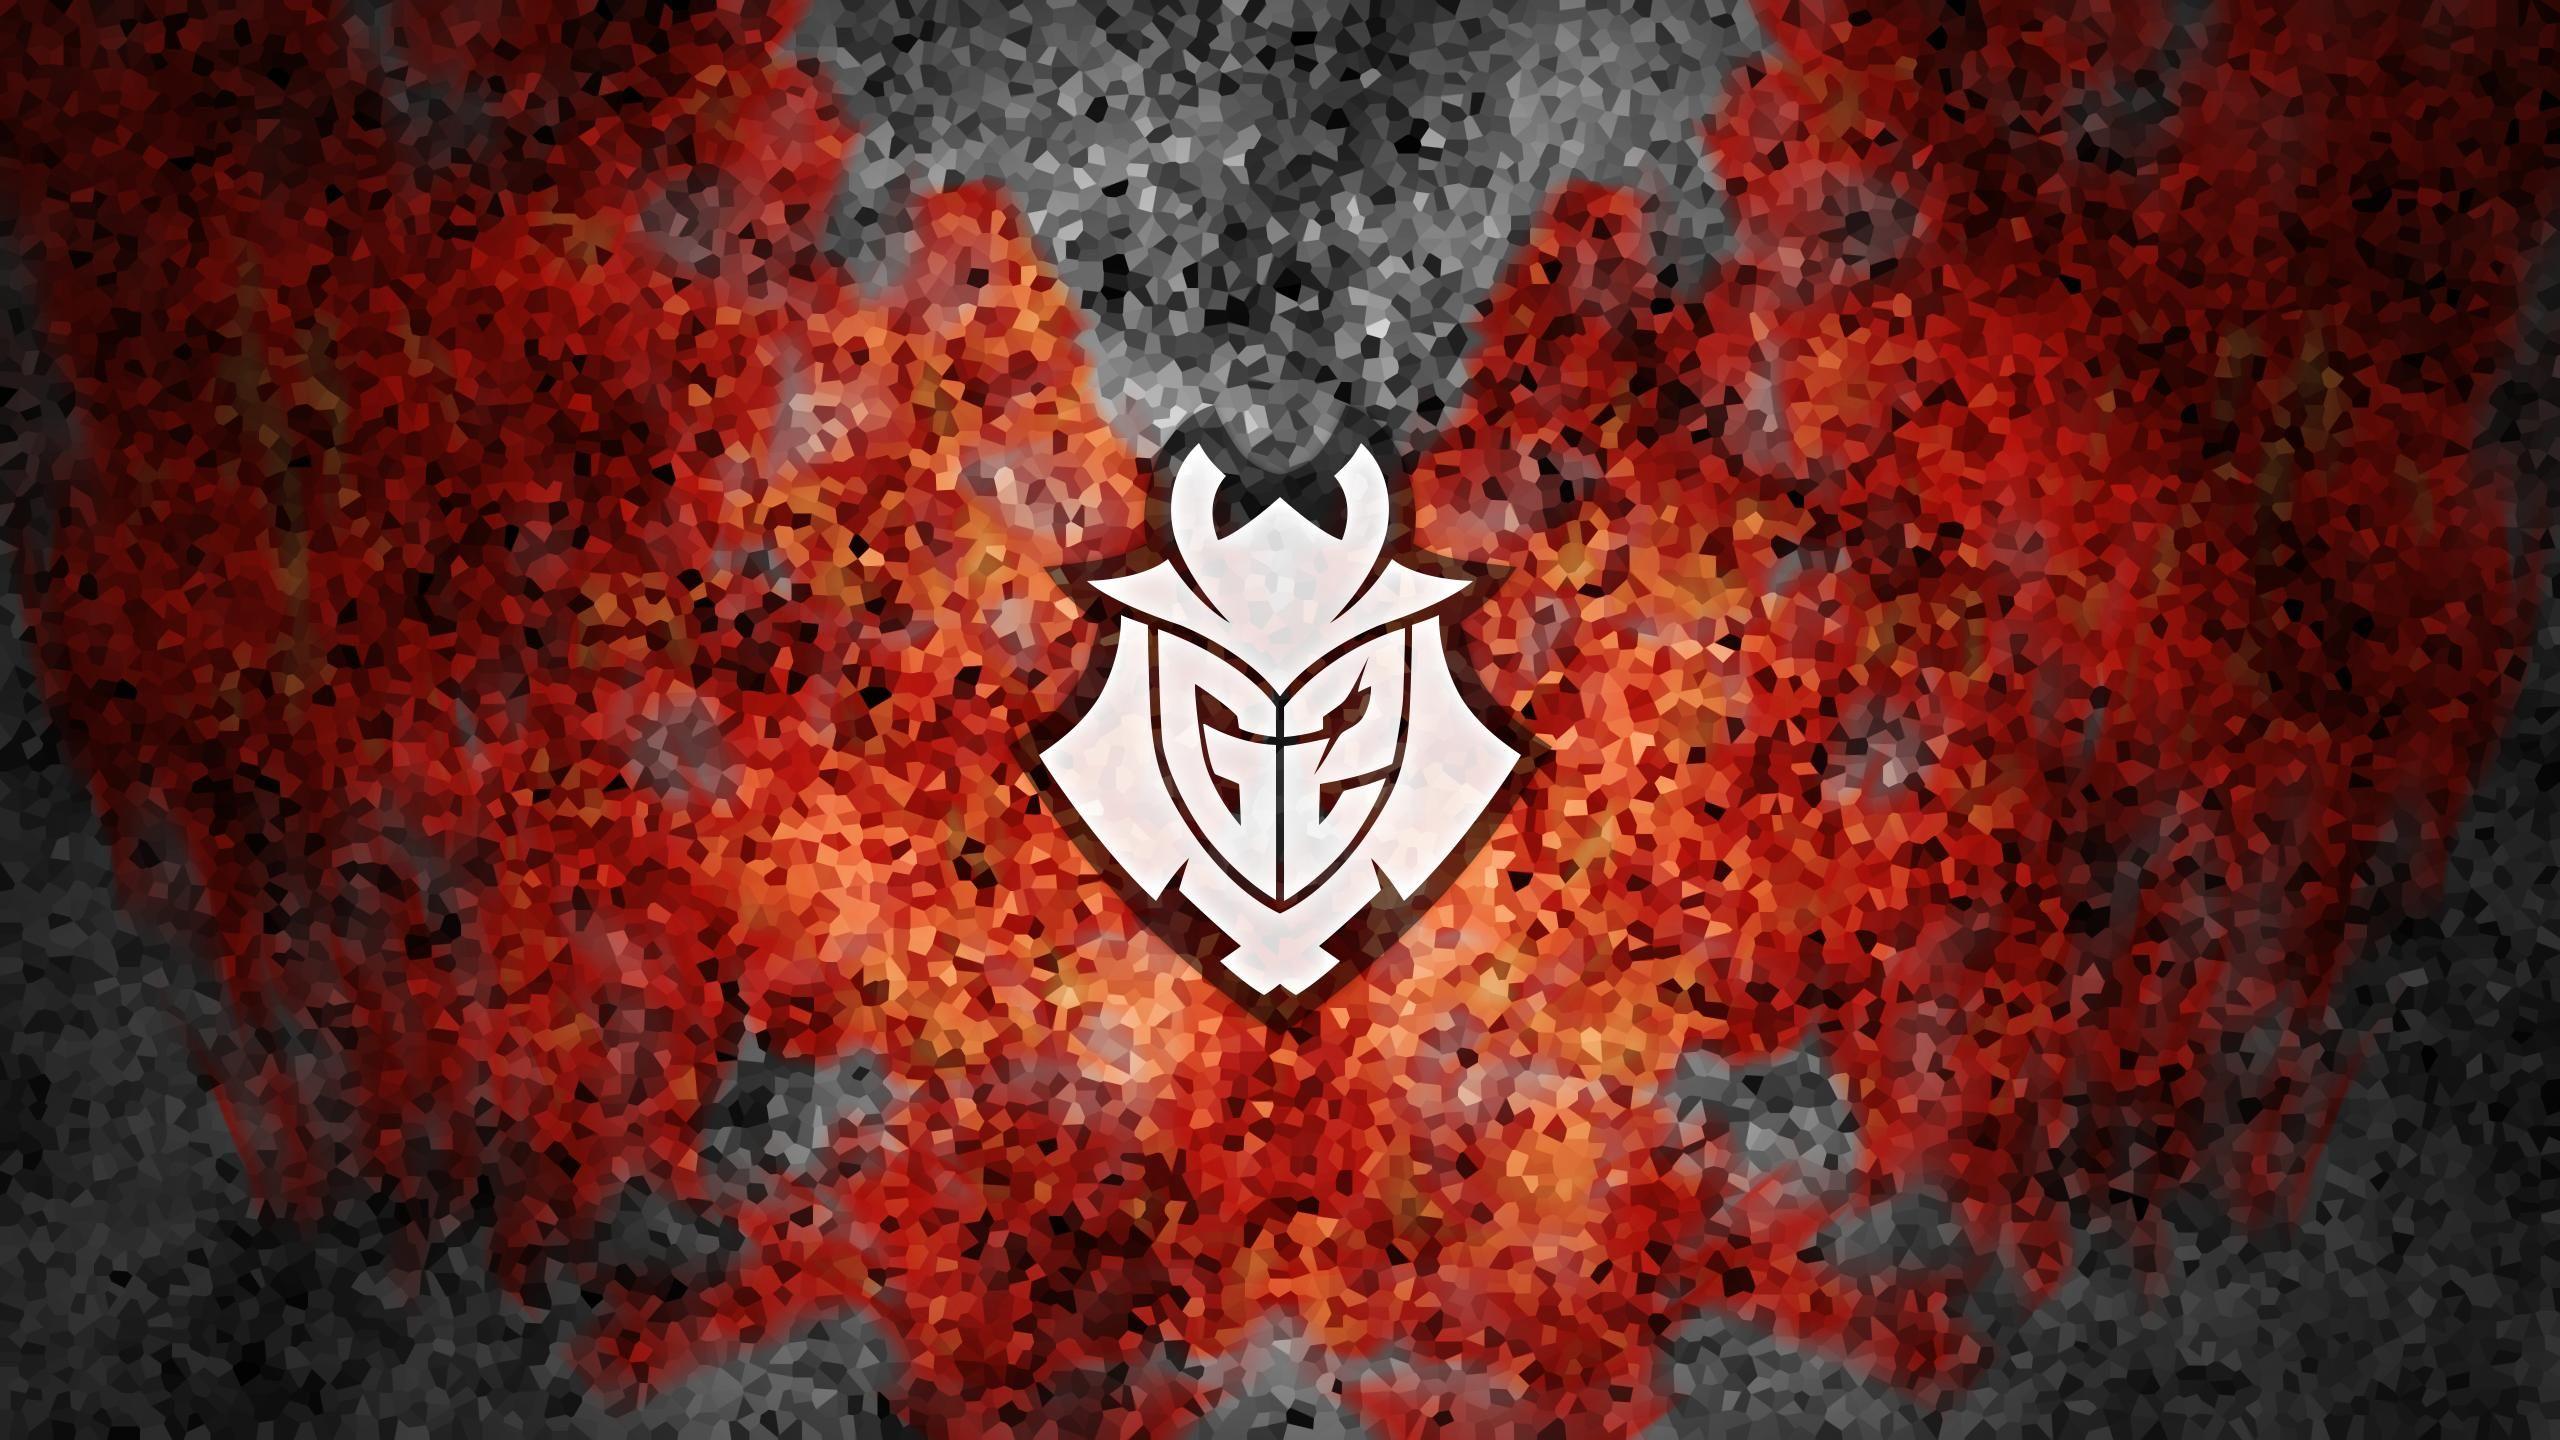 New wallpaper for the G2 fans (1440p) #games